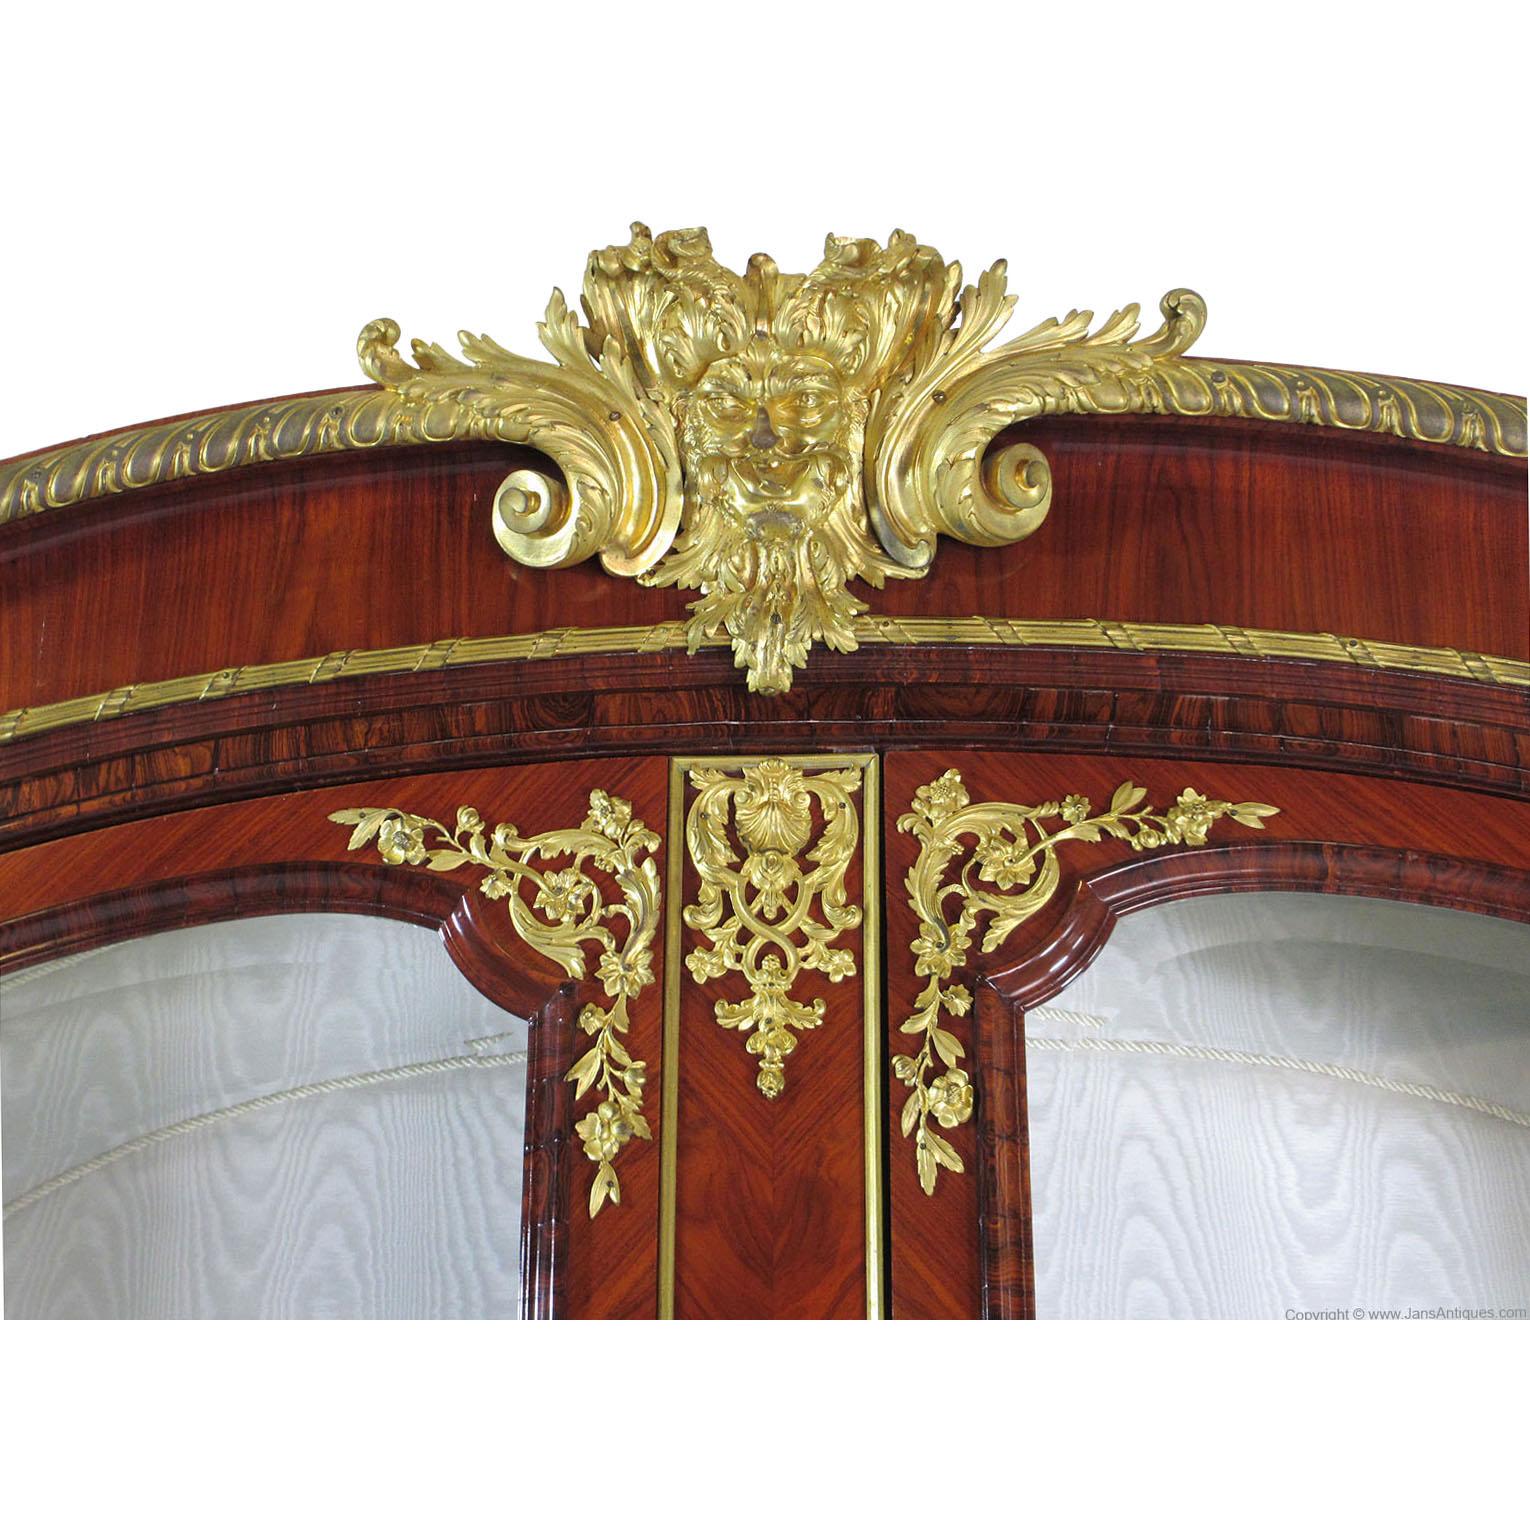 A Very Fine and Palatial French 19th Century Transition Louis XIV-XV Style Kingwood and Ormolu Mounted Two-Door Vitrine Cabinet, the arched top surmounted with gilt-bronze moldings and trim, centered atop with an allegorical Bacchic male mask and